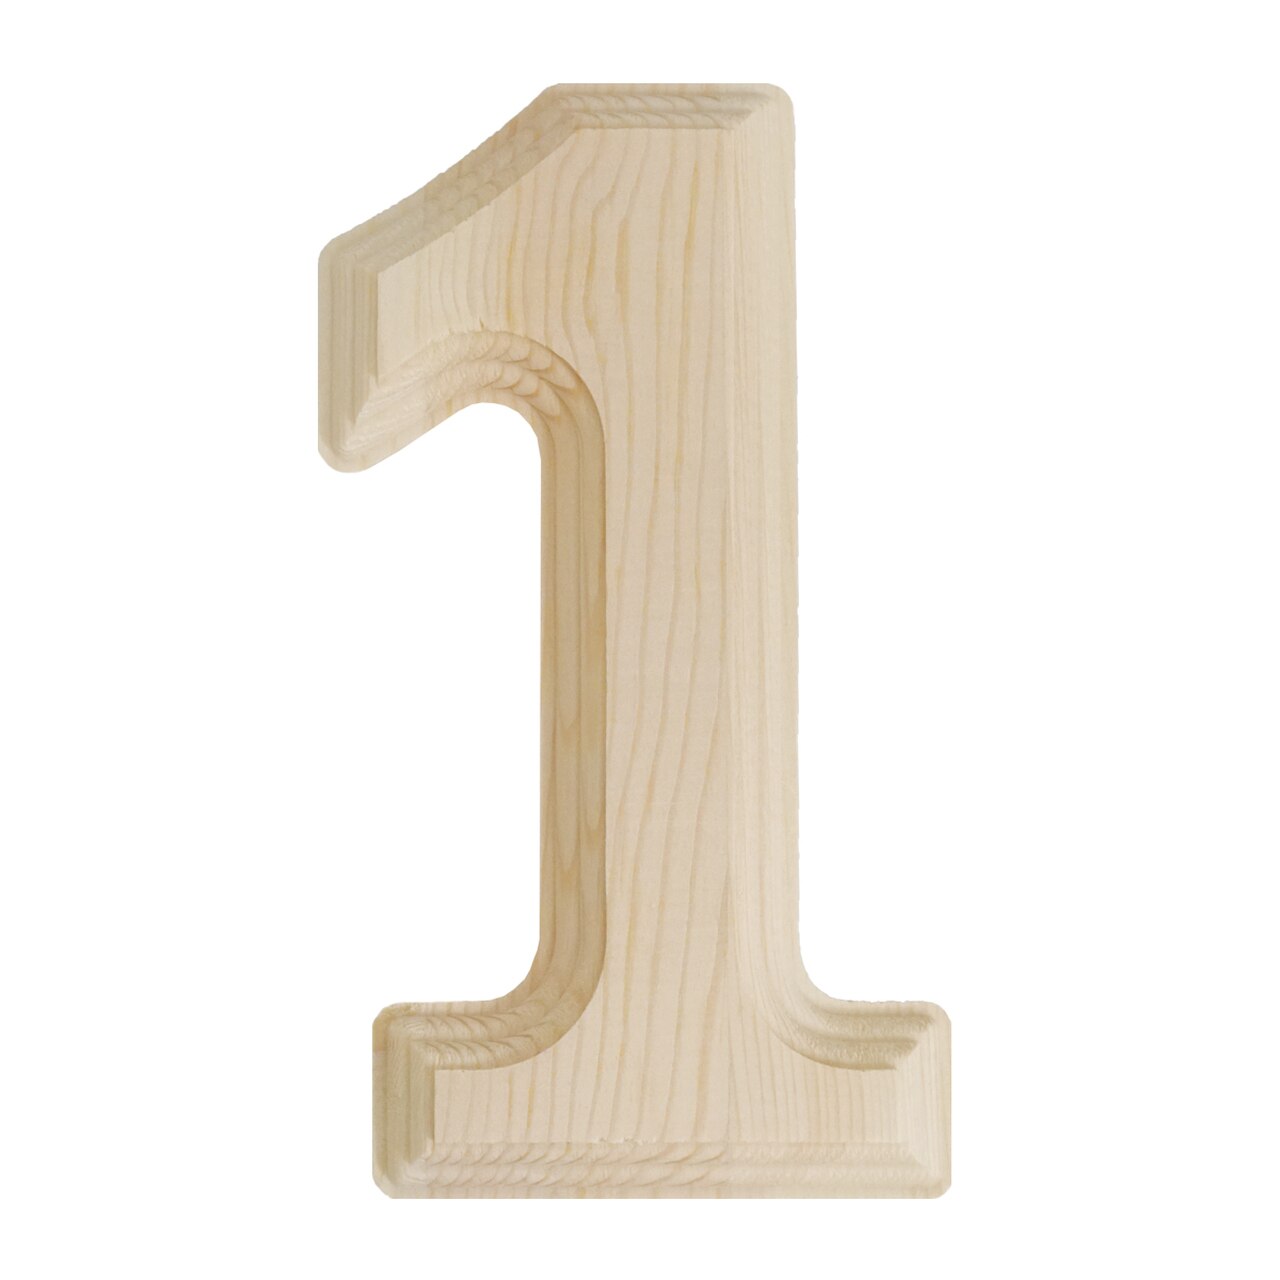 Crafts Central Pine Wood Beveled Wooden Numbers for Arts & Crafts, Decorations and DIY (Number 1)